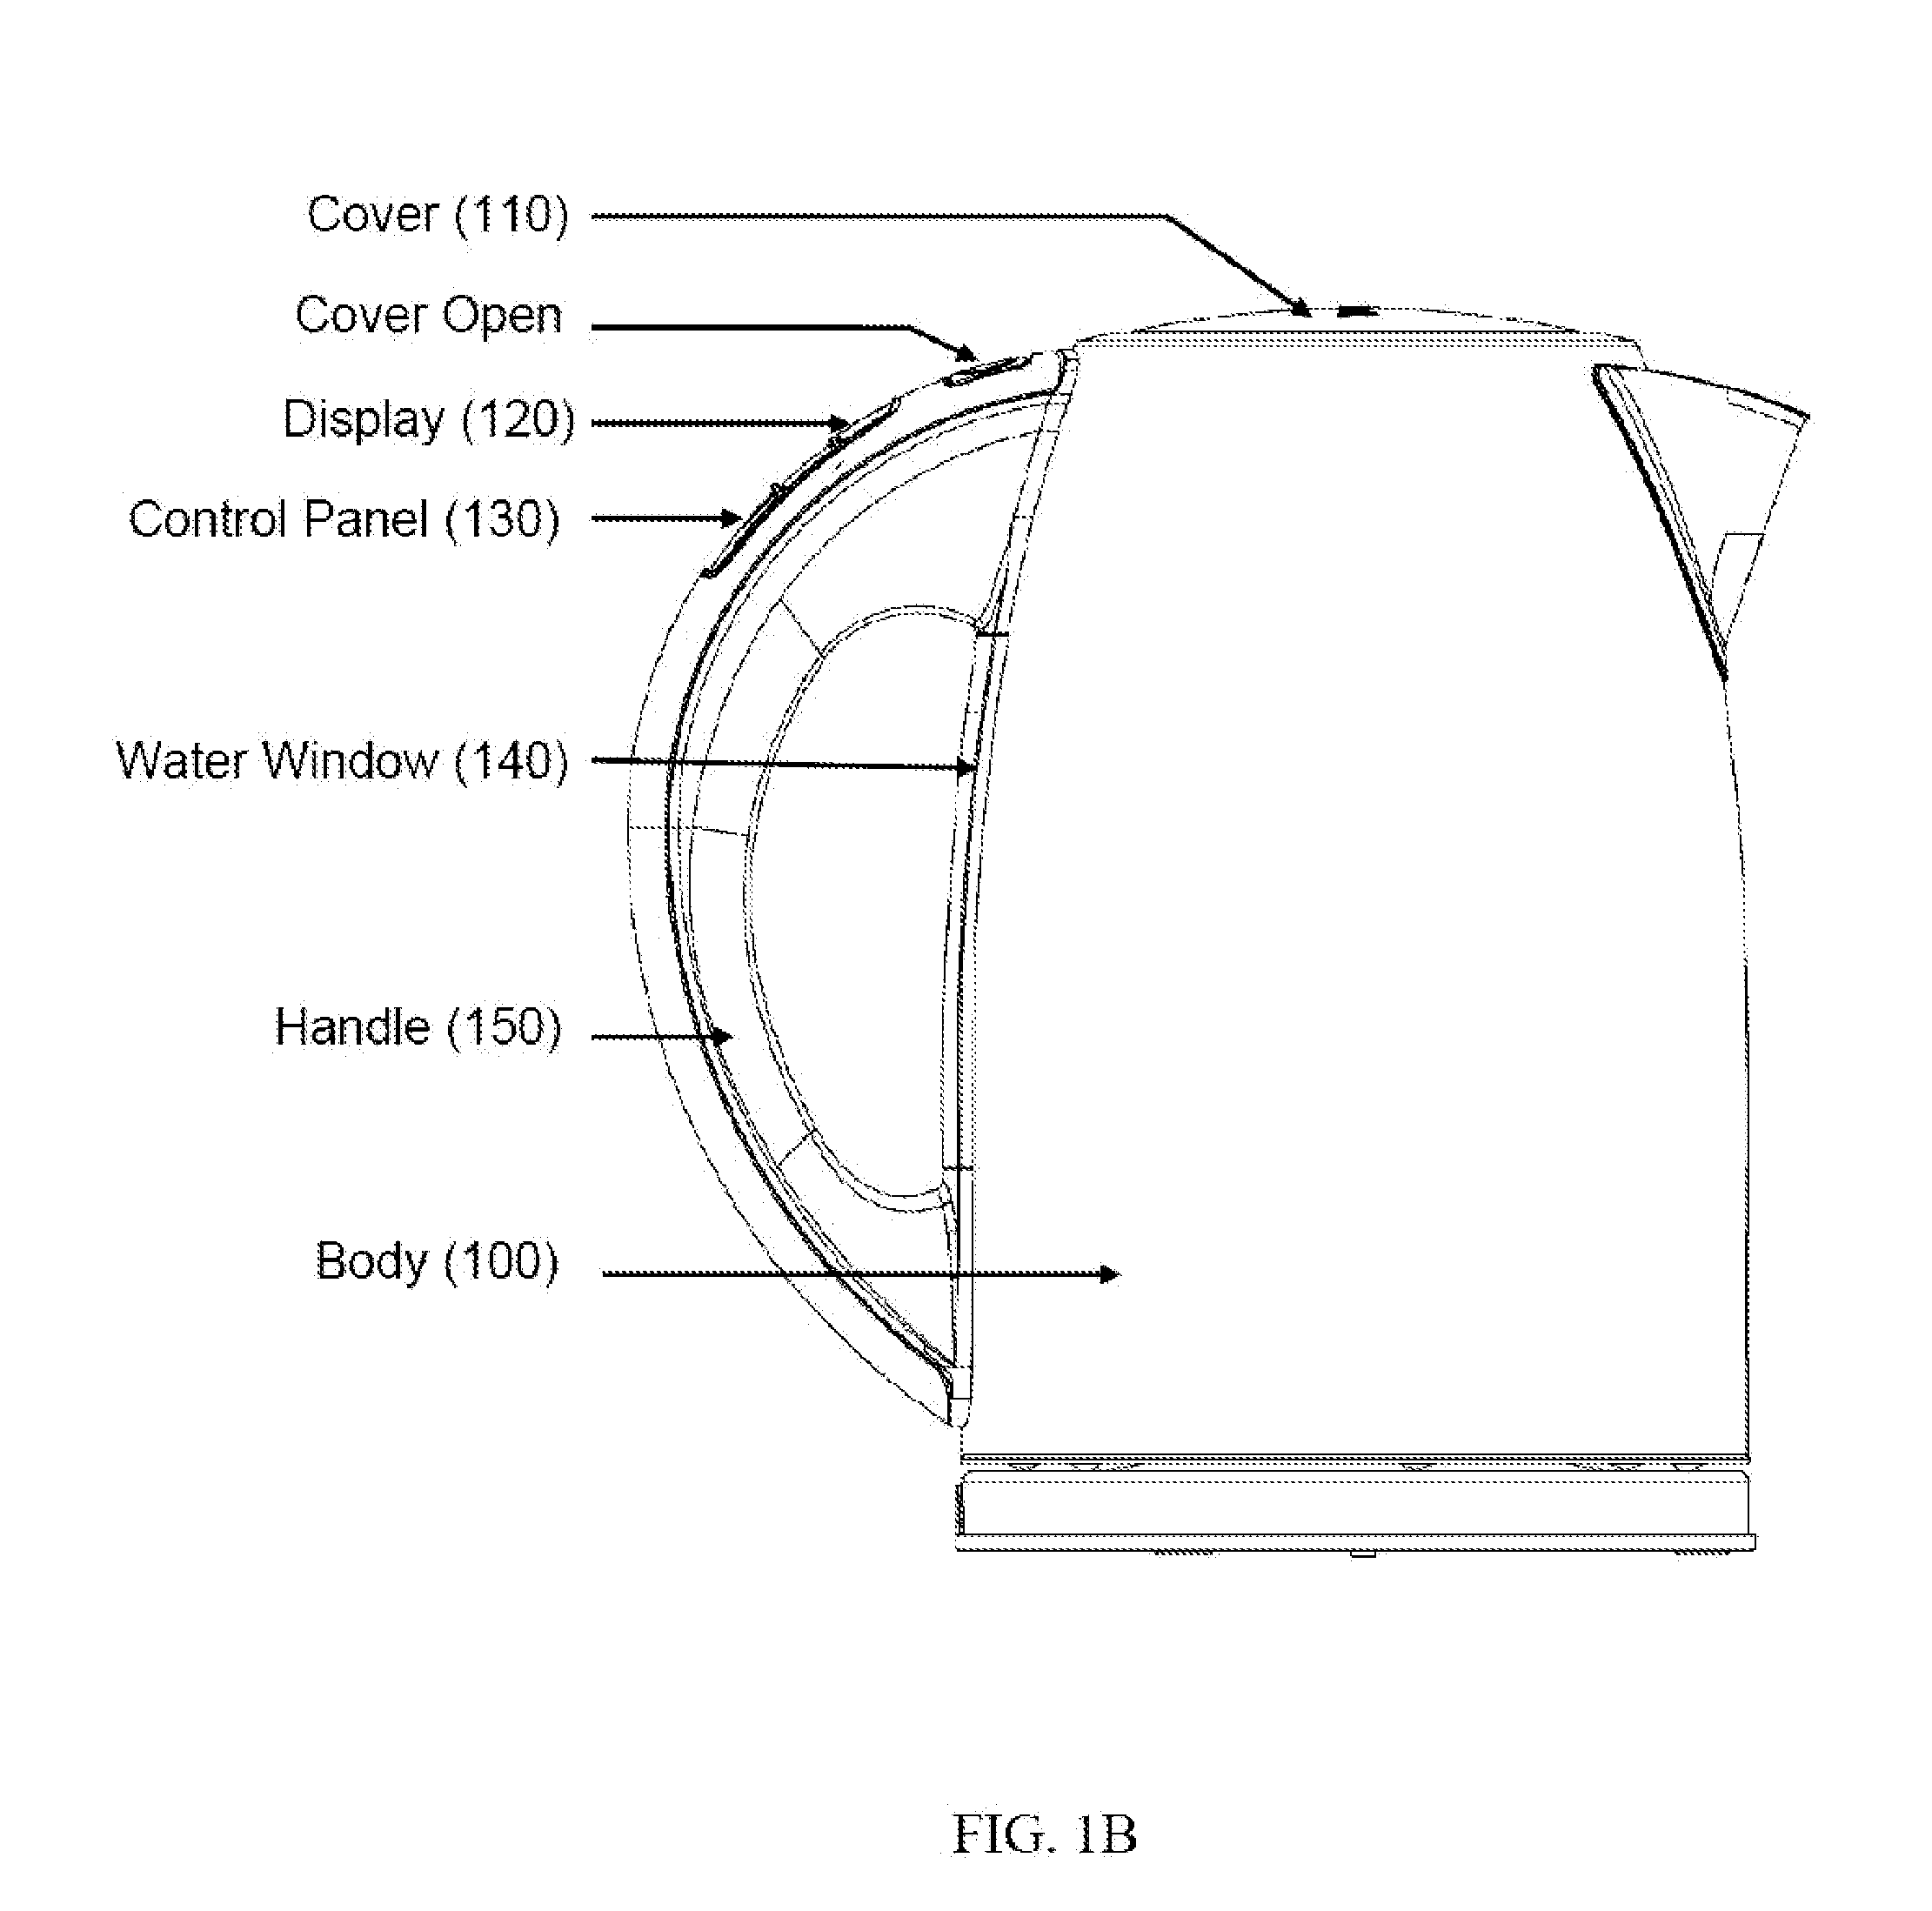 Non-contact liquid level sensing system for household electric appliances